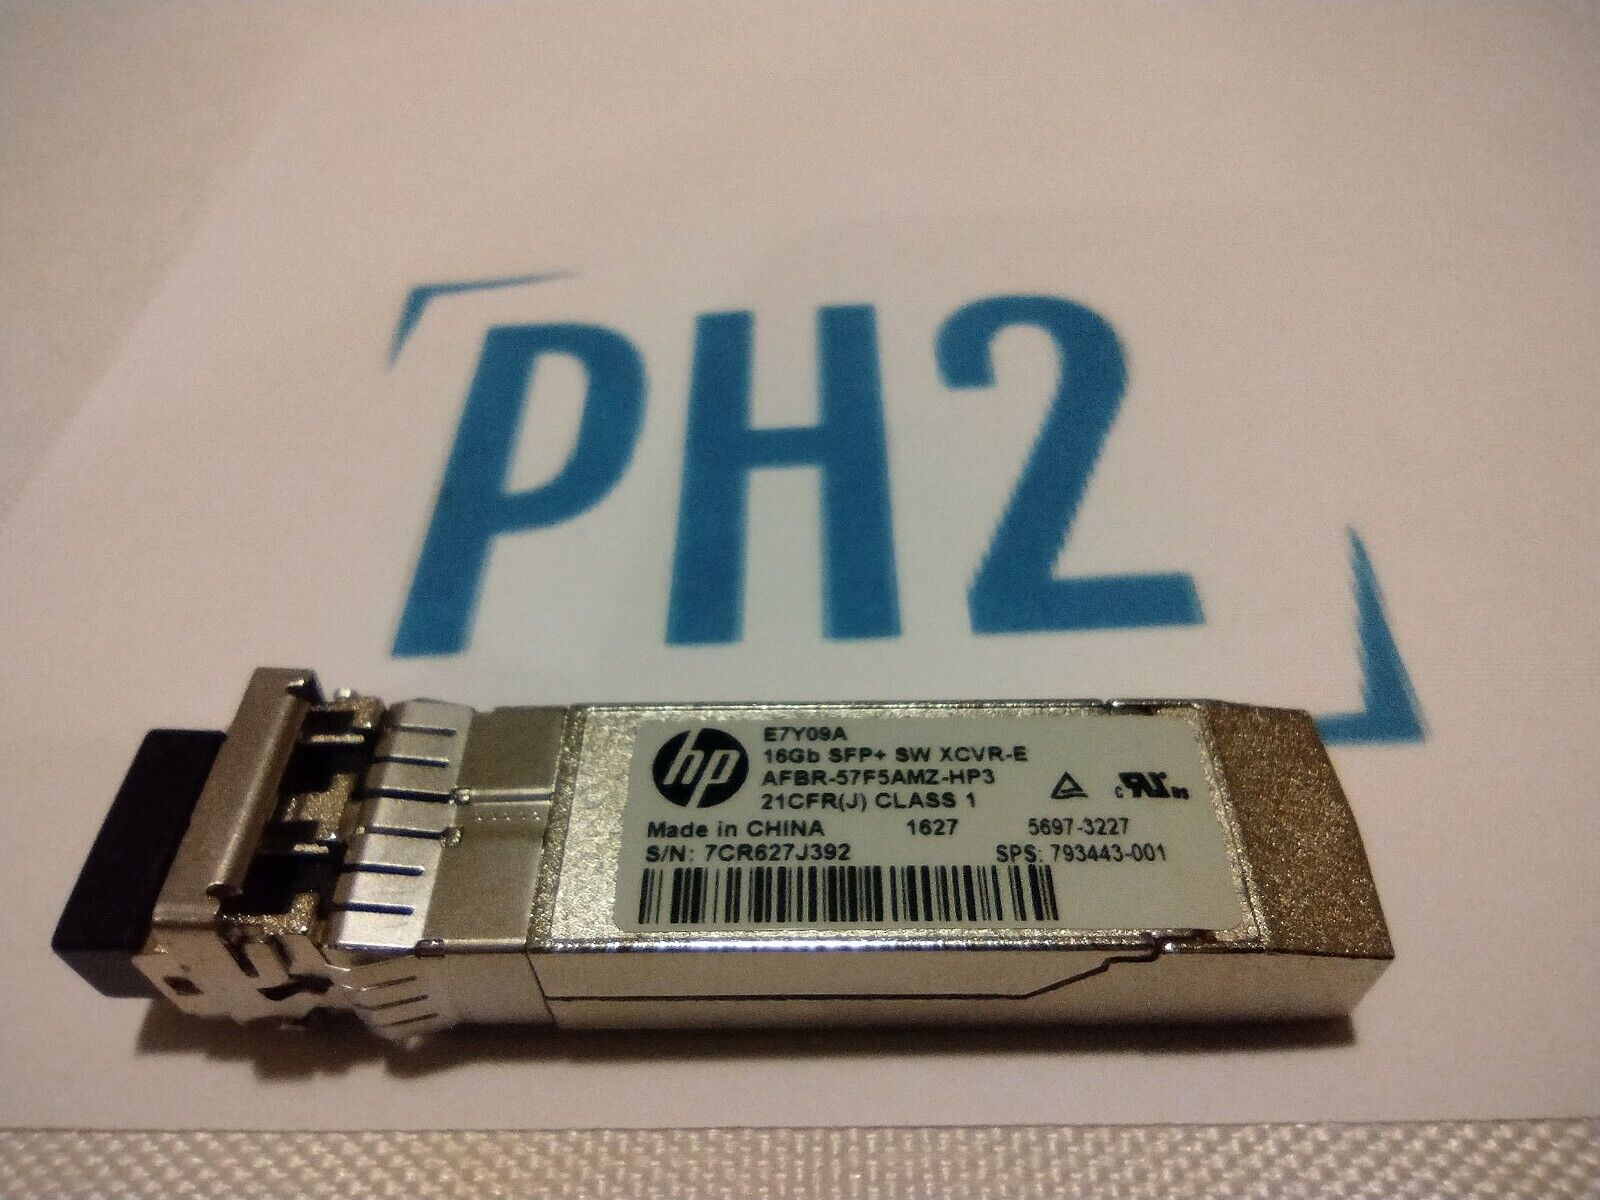 HPE E7Y09A 793443-001 16GB SFP+ SW INDUSTRIAL EXTENDED TRANSCEIVER